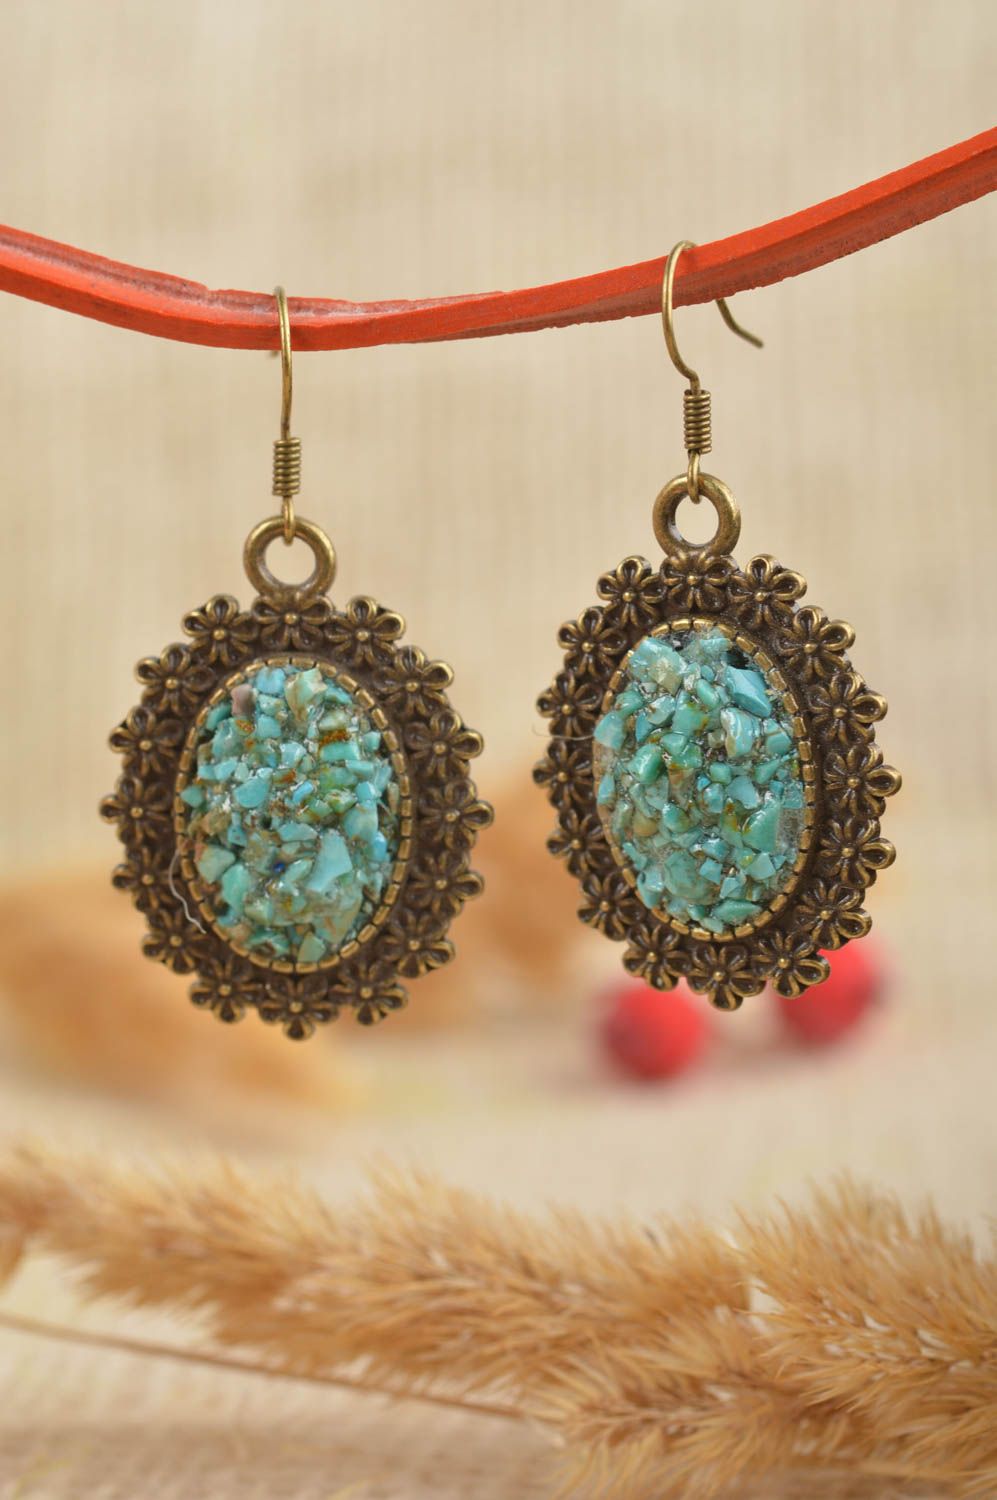 Earrings with natural stone stylish designer earrings elegant jewelry photo 1